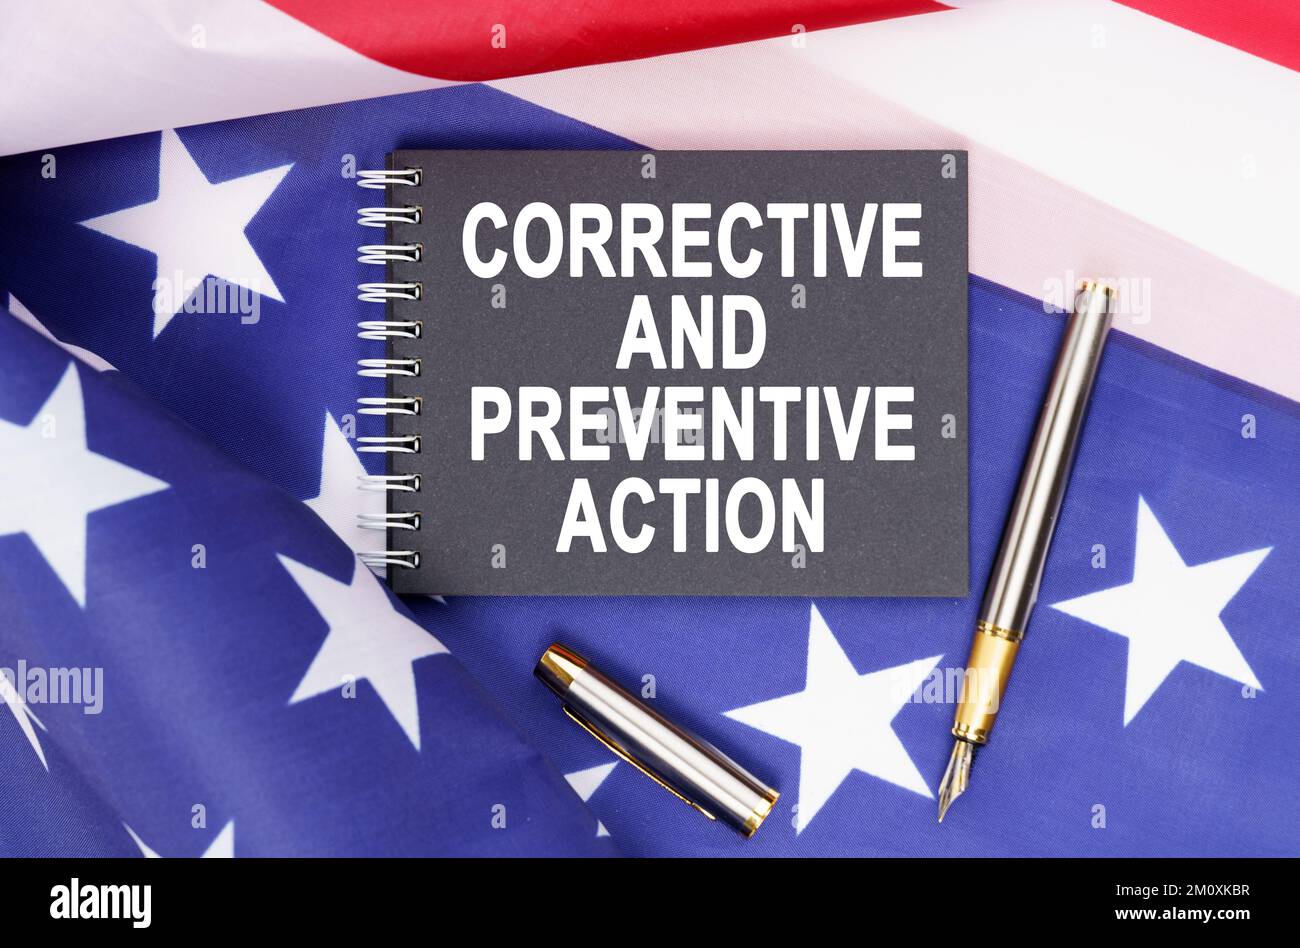 Business and finance concept. On the table is an American flag, a pen and a notebook with the inscription - CORRECTIVE AND PREVENTIVE ACTION Stock Photo